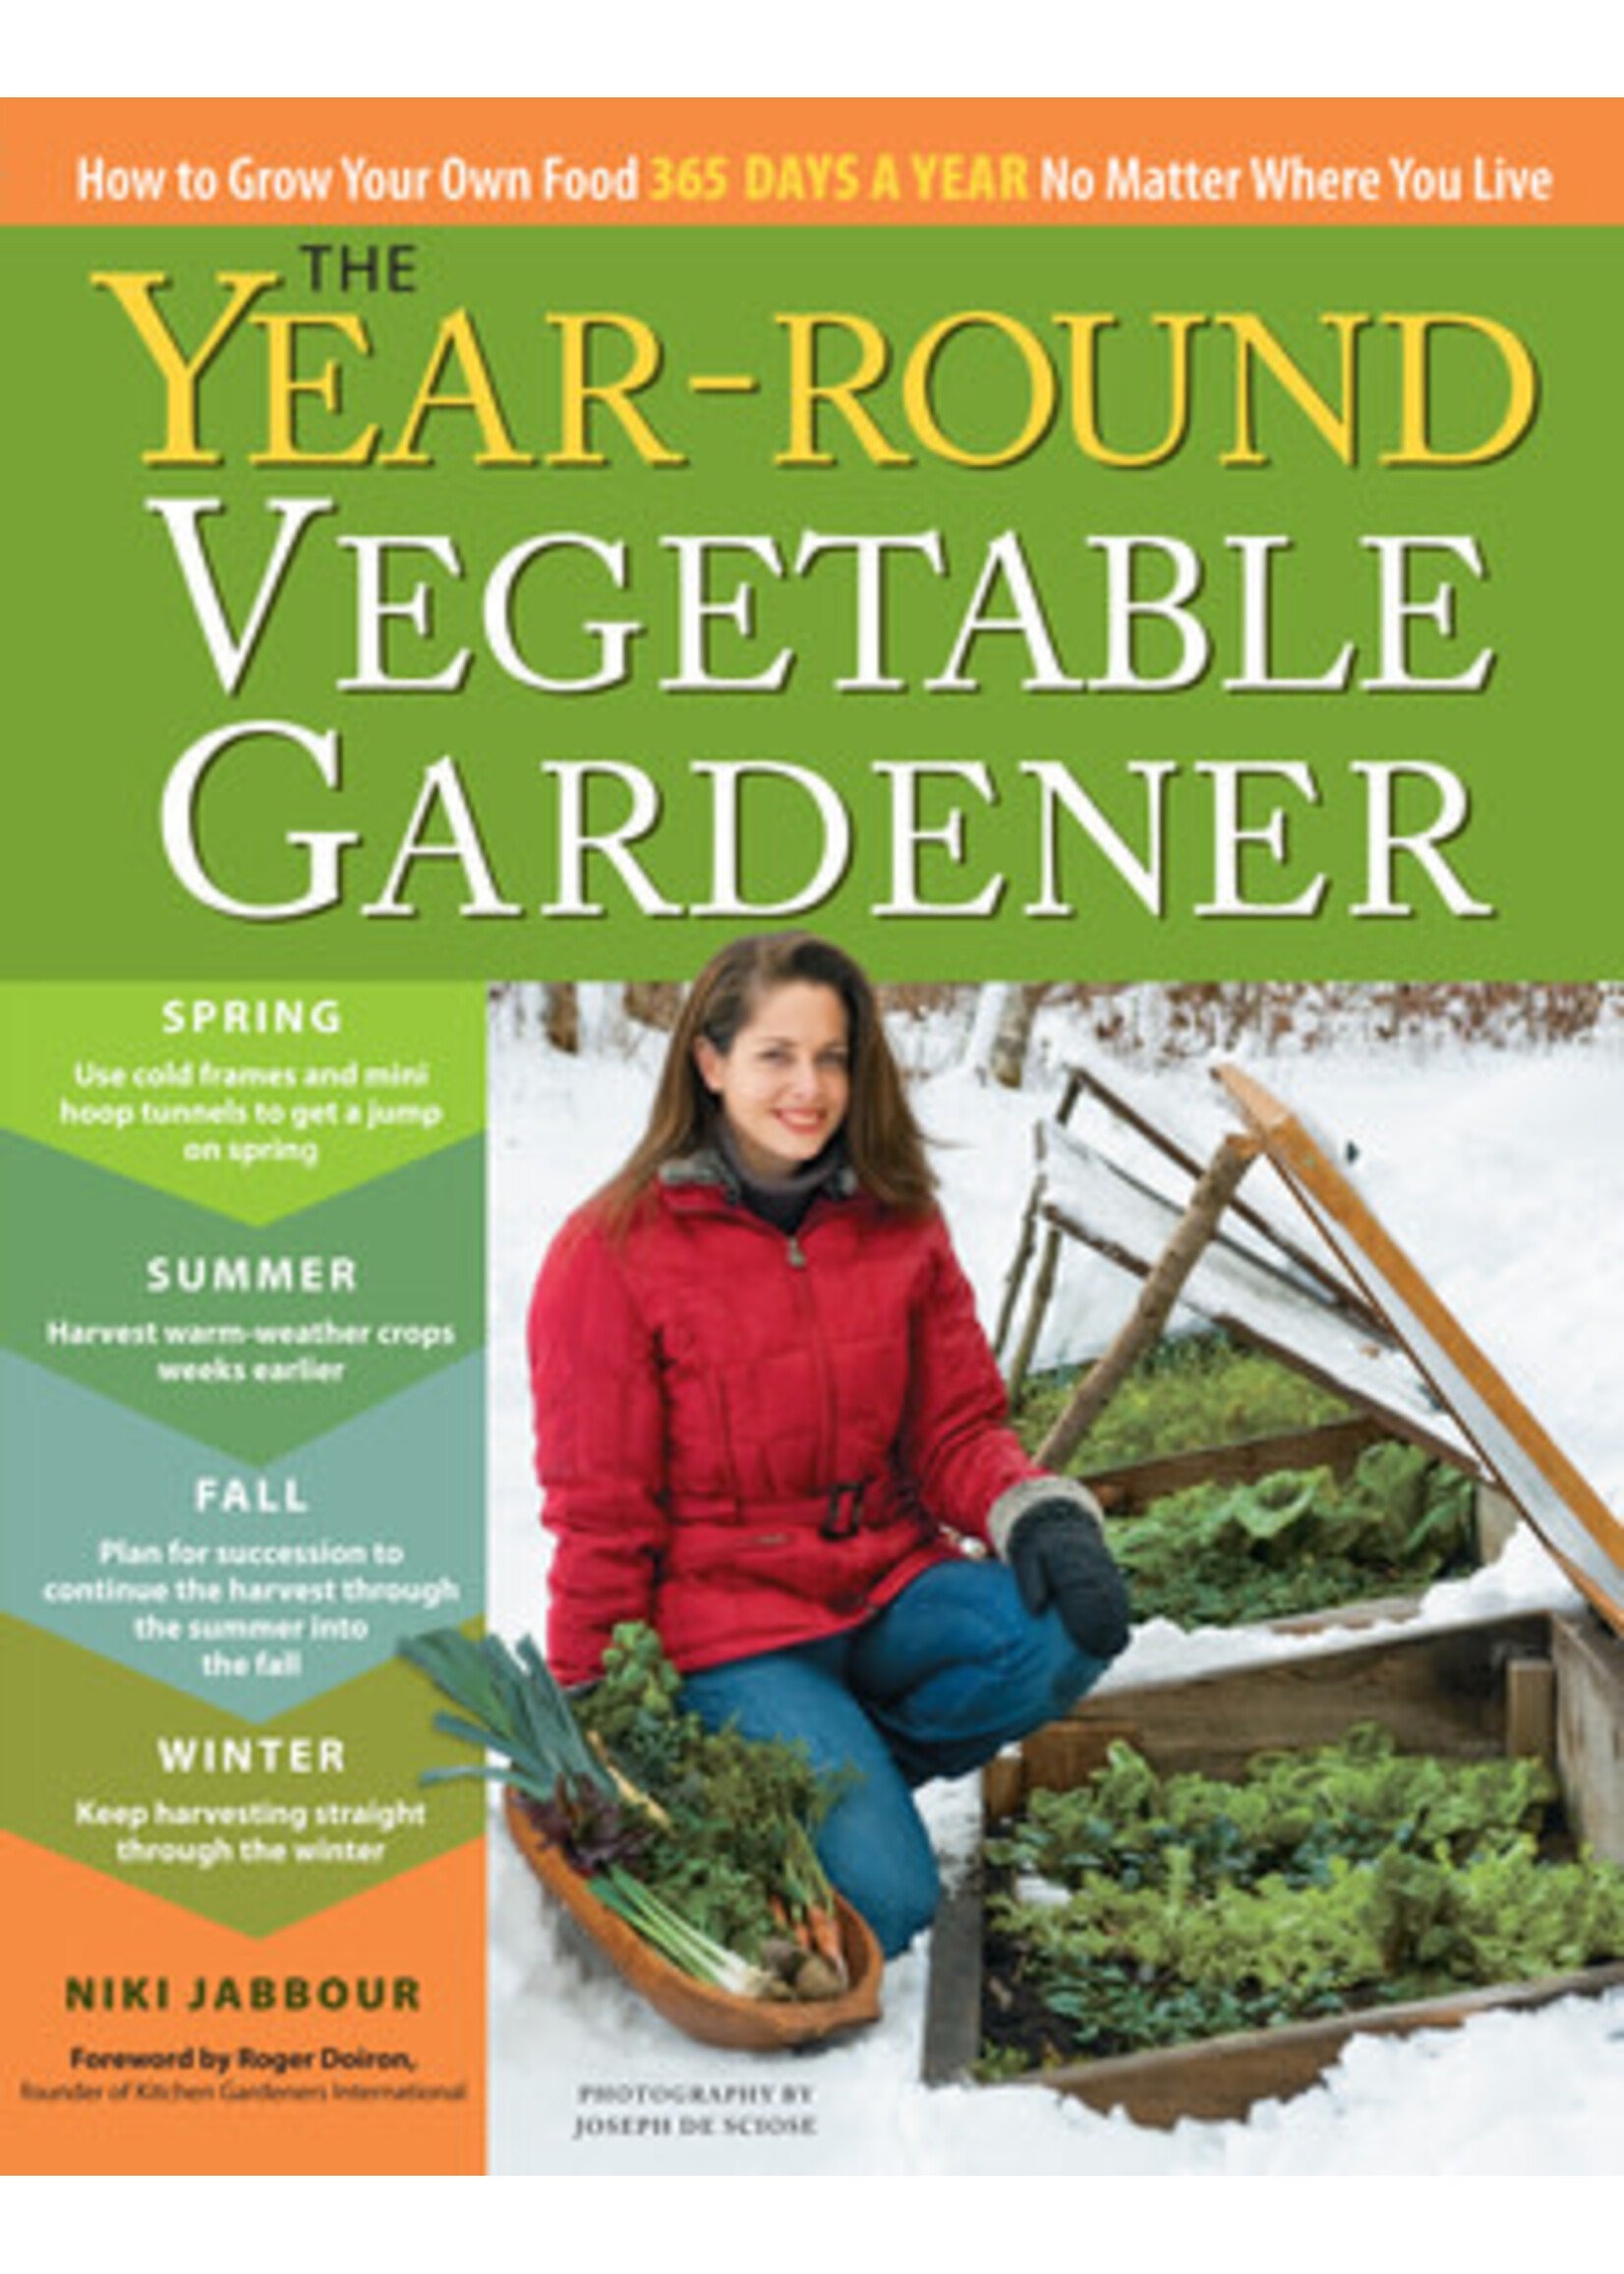 The Year-Round Vegetable Gardener: How to Grow Your Own Food 365 Days a Year, No Matter Where You Live by Niki Jabbour, Joseph De Sciose